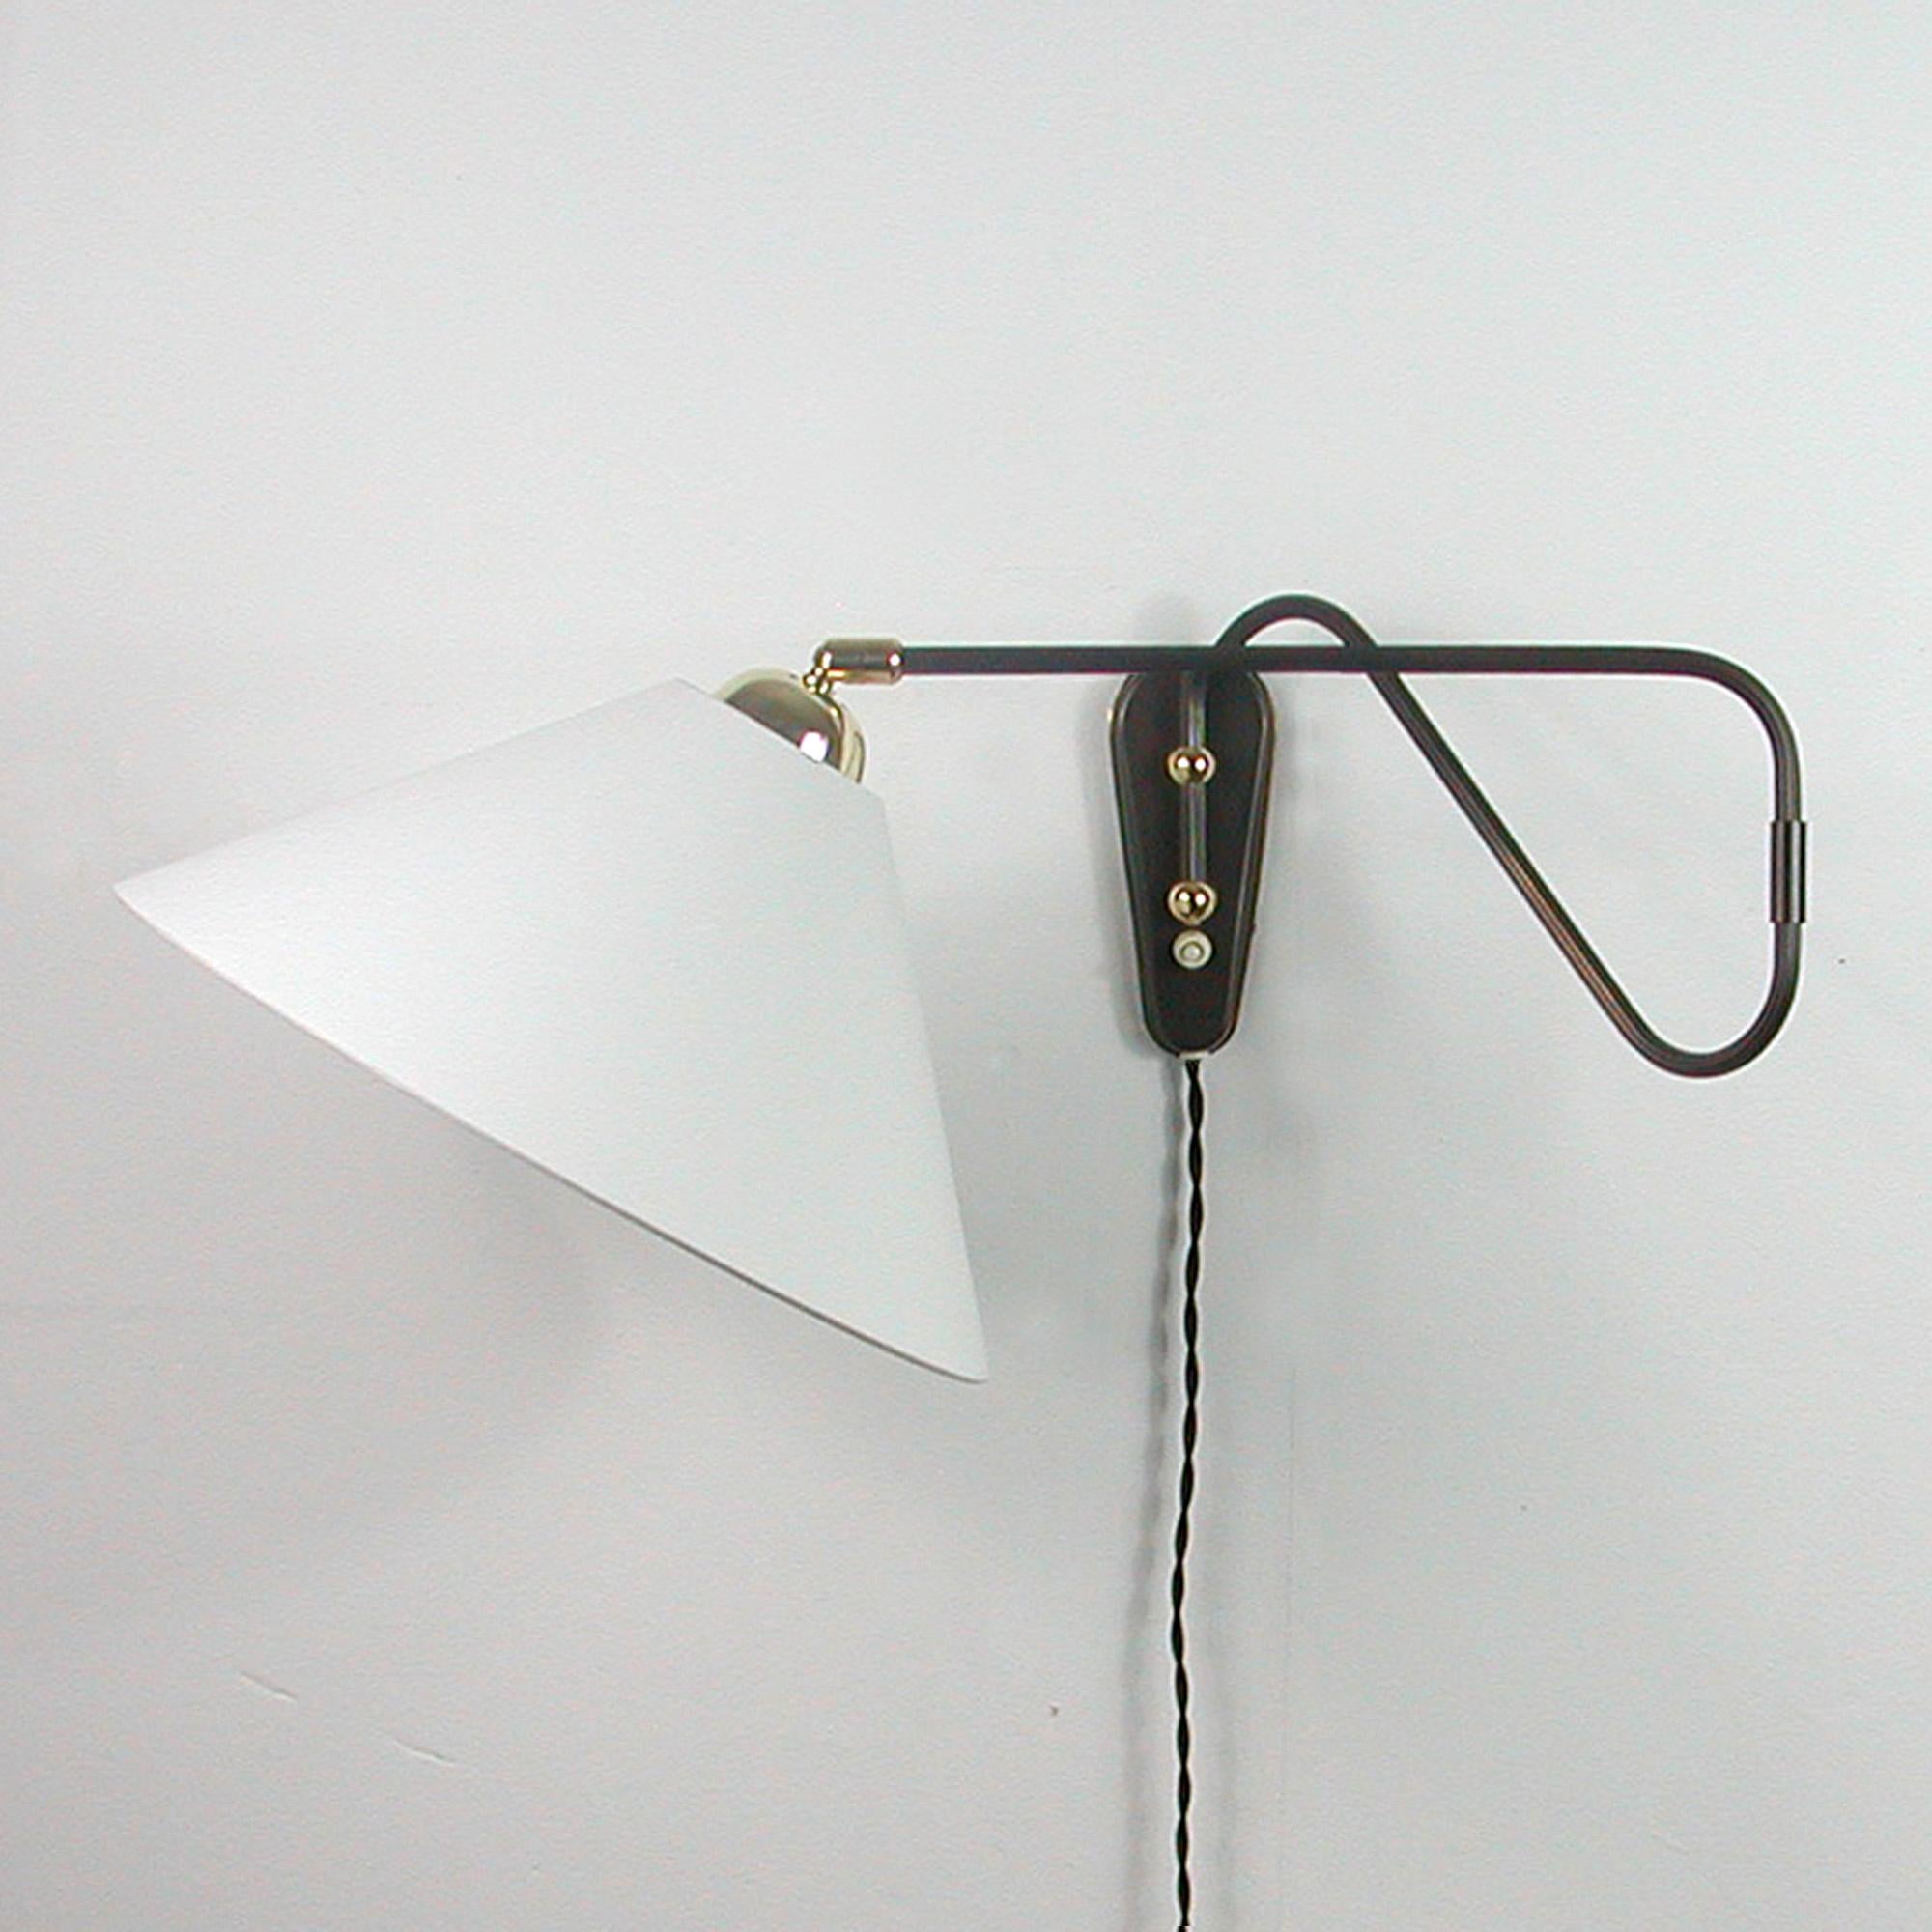 This unusual 1950s adjustable and articulating vintage wall light was designed and manufactured in Germany by Cosack Leuchten.

The lamp features an off-white fabric lampshade and bronzed brass articulating lamp arm with brass details. The lamp